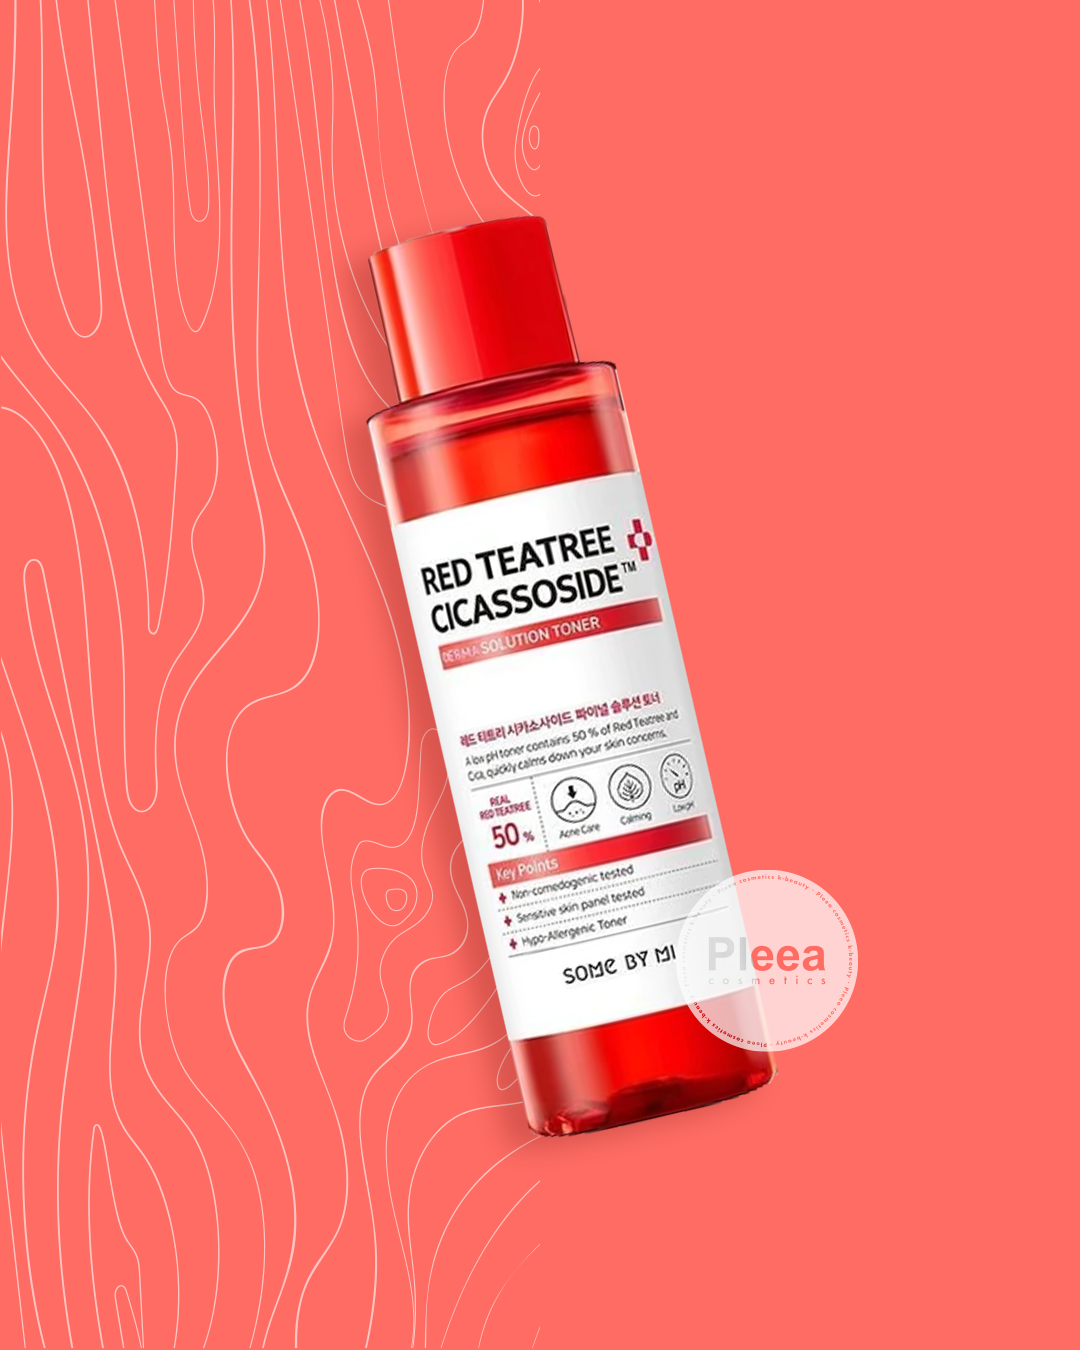 [Some-By-Mi]-Red-Teatree-Cicassoside™-Derma-solution-Toner-1-k-beauty-colombia-cosmetica-coreana